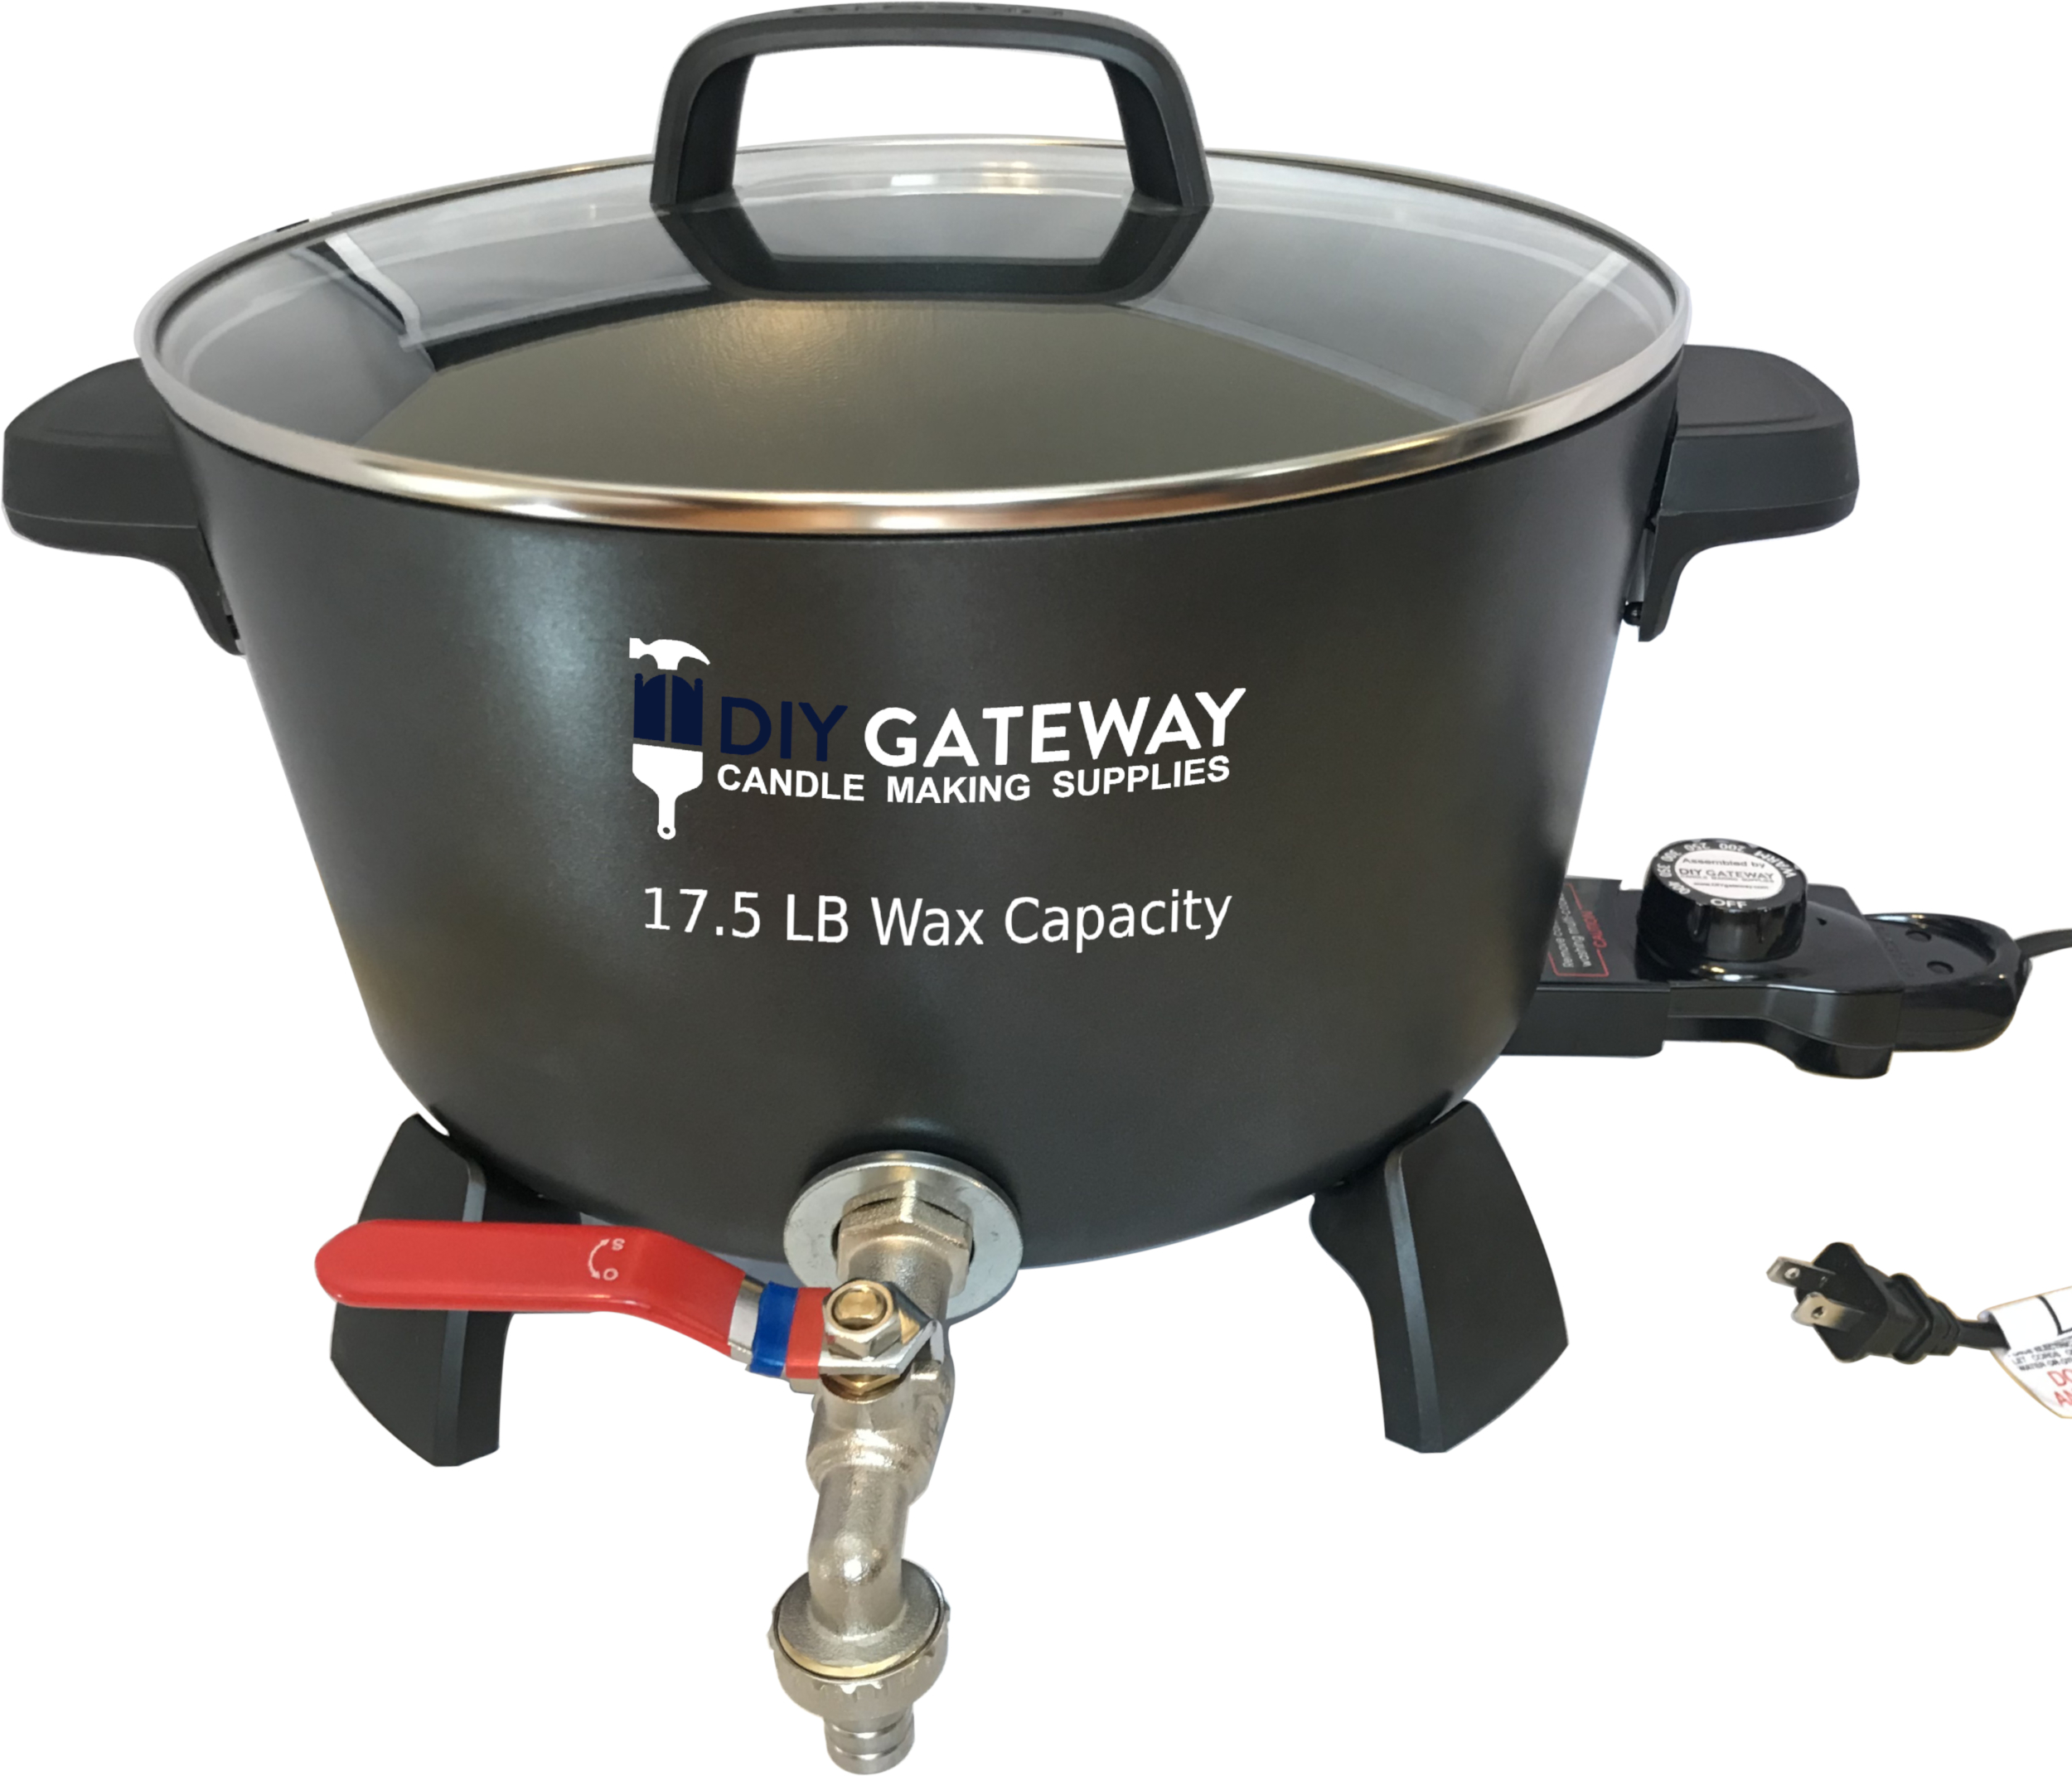 Used/Refurbished 35 LB Extra Large Wax Melter for Candle Making - DIY  Gateway